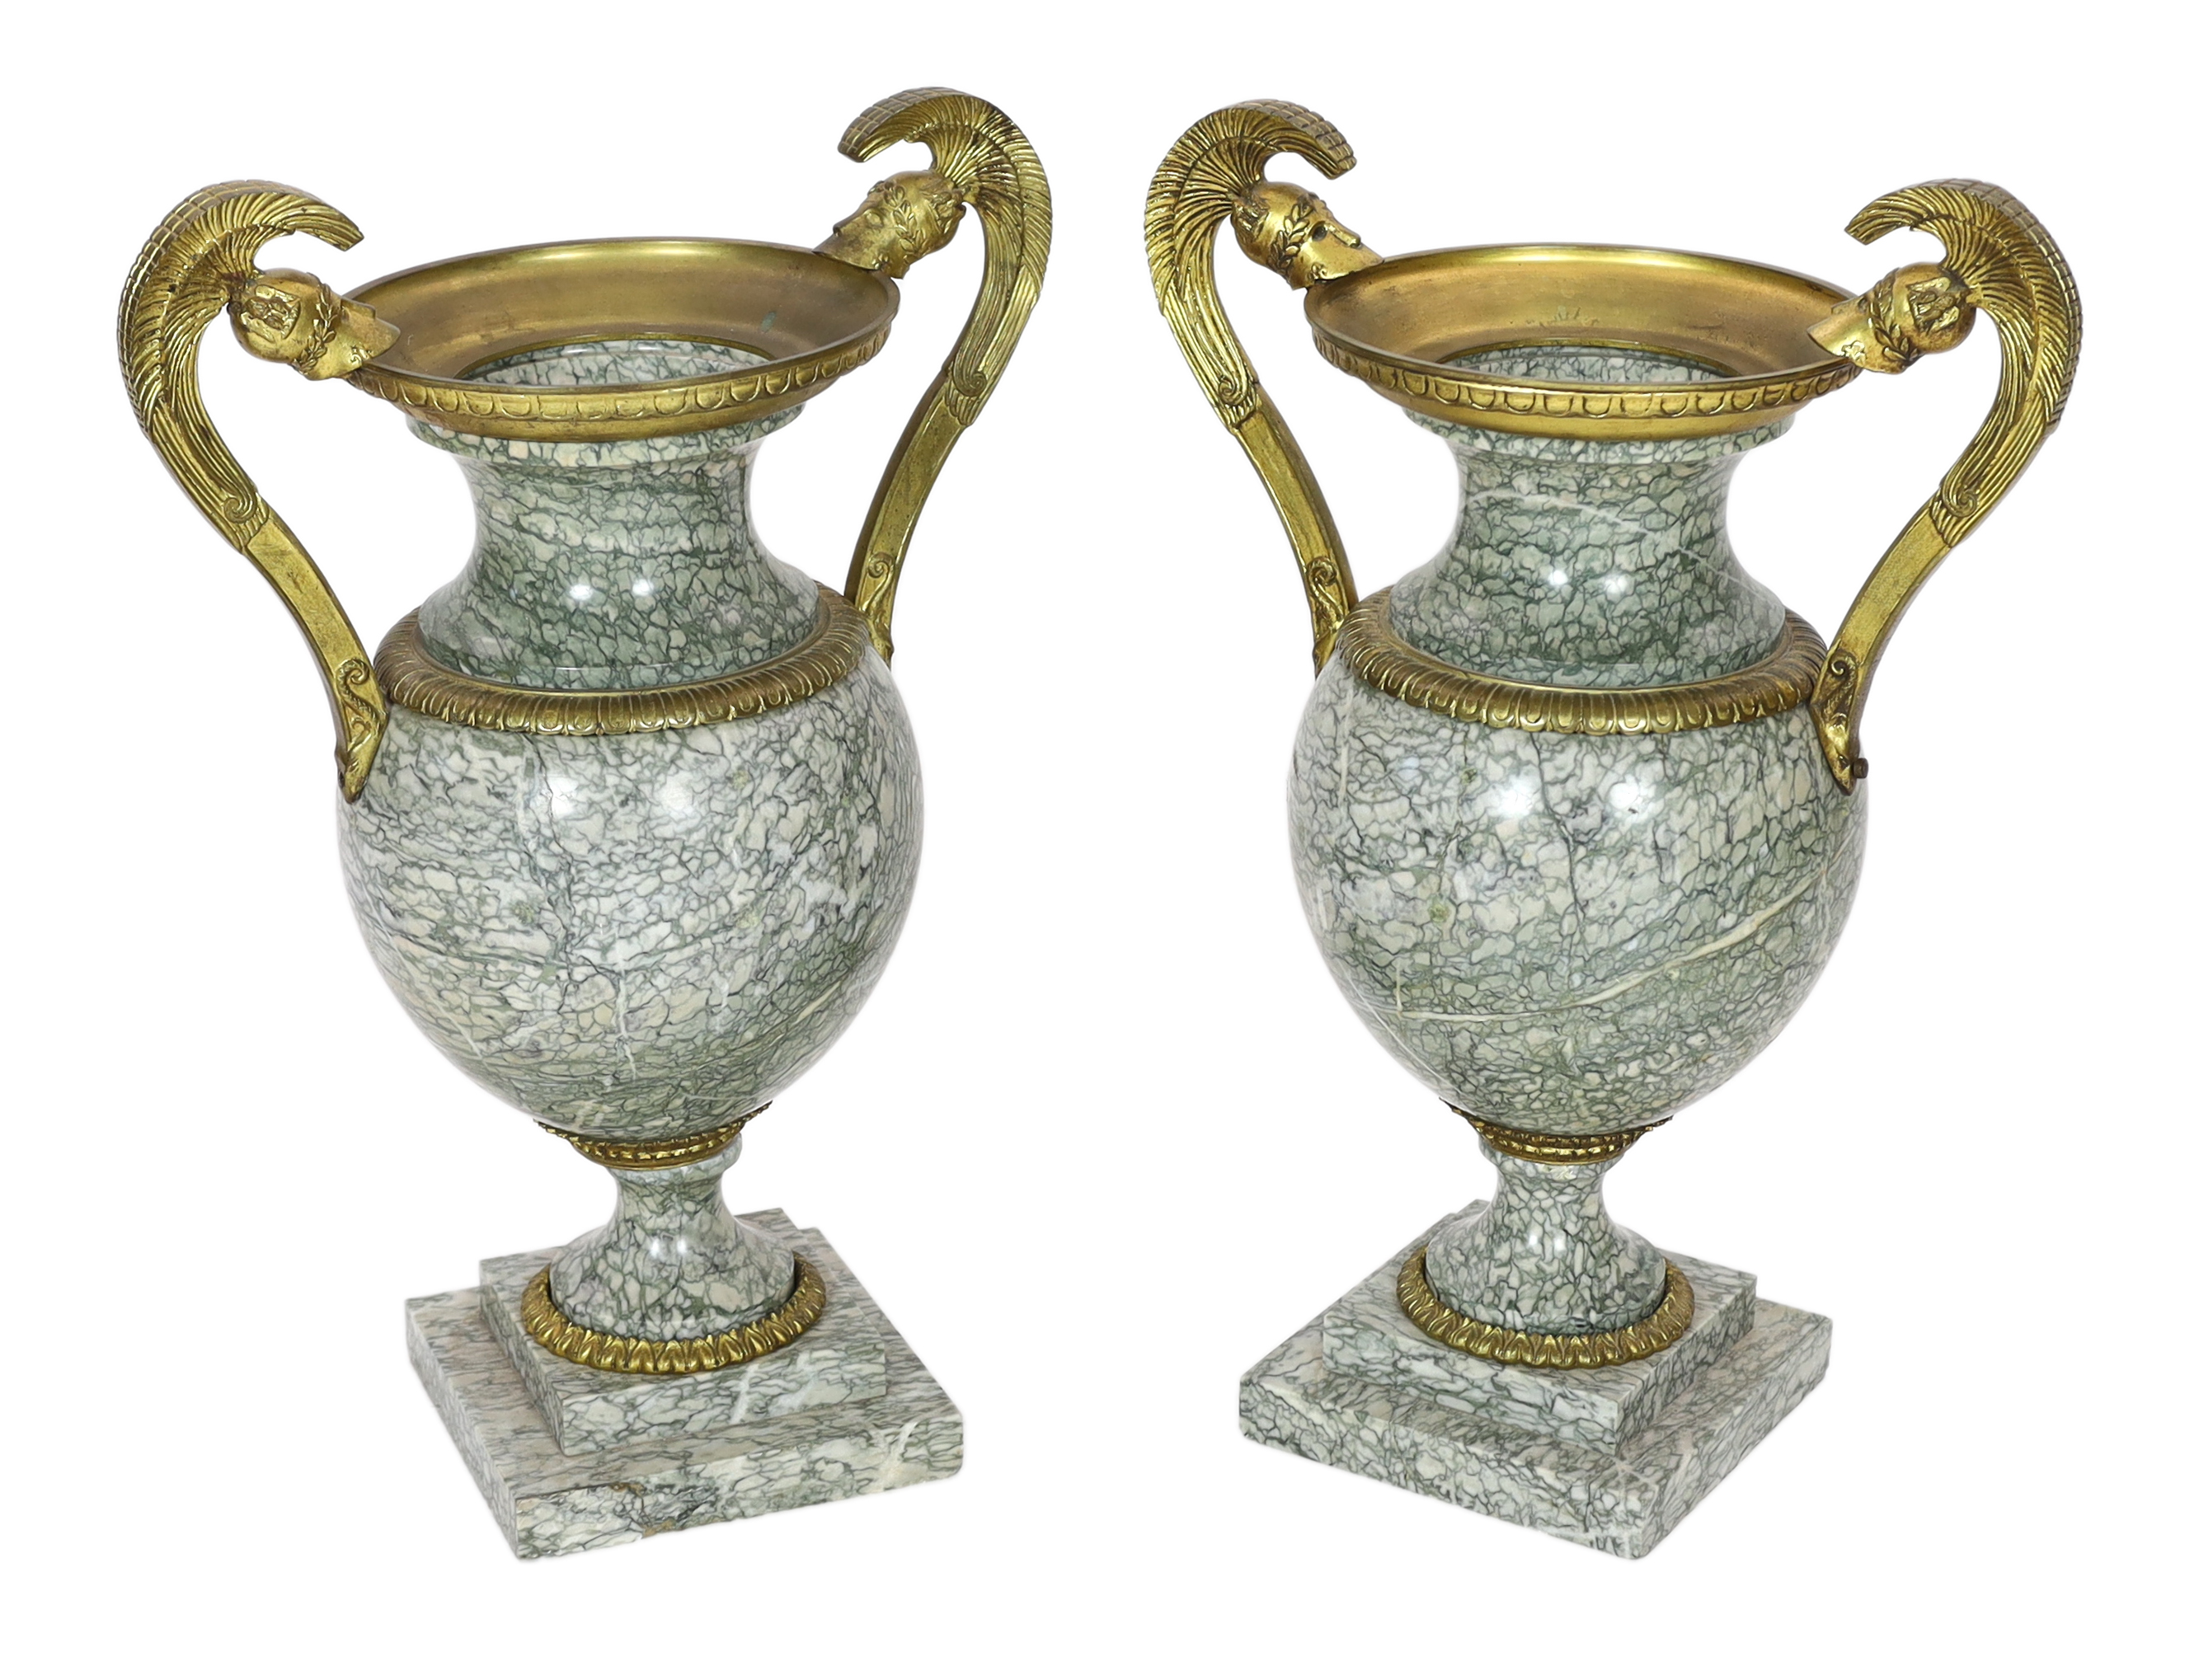 A pair of 19th century ormolu mounted Chipollino green variegated marble vases, 43cm wide, 60cm high, Please note this lot attracts an additional import tax of 5% on the hammer price